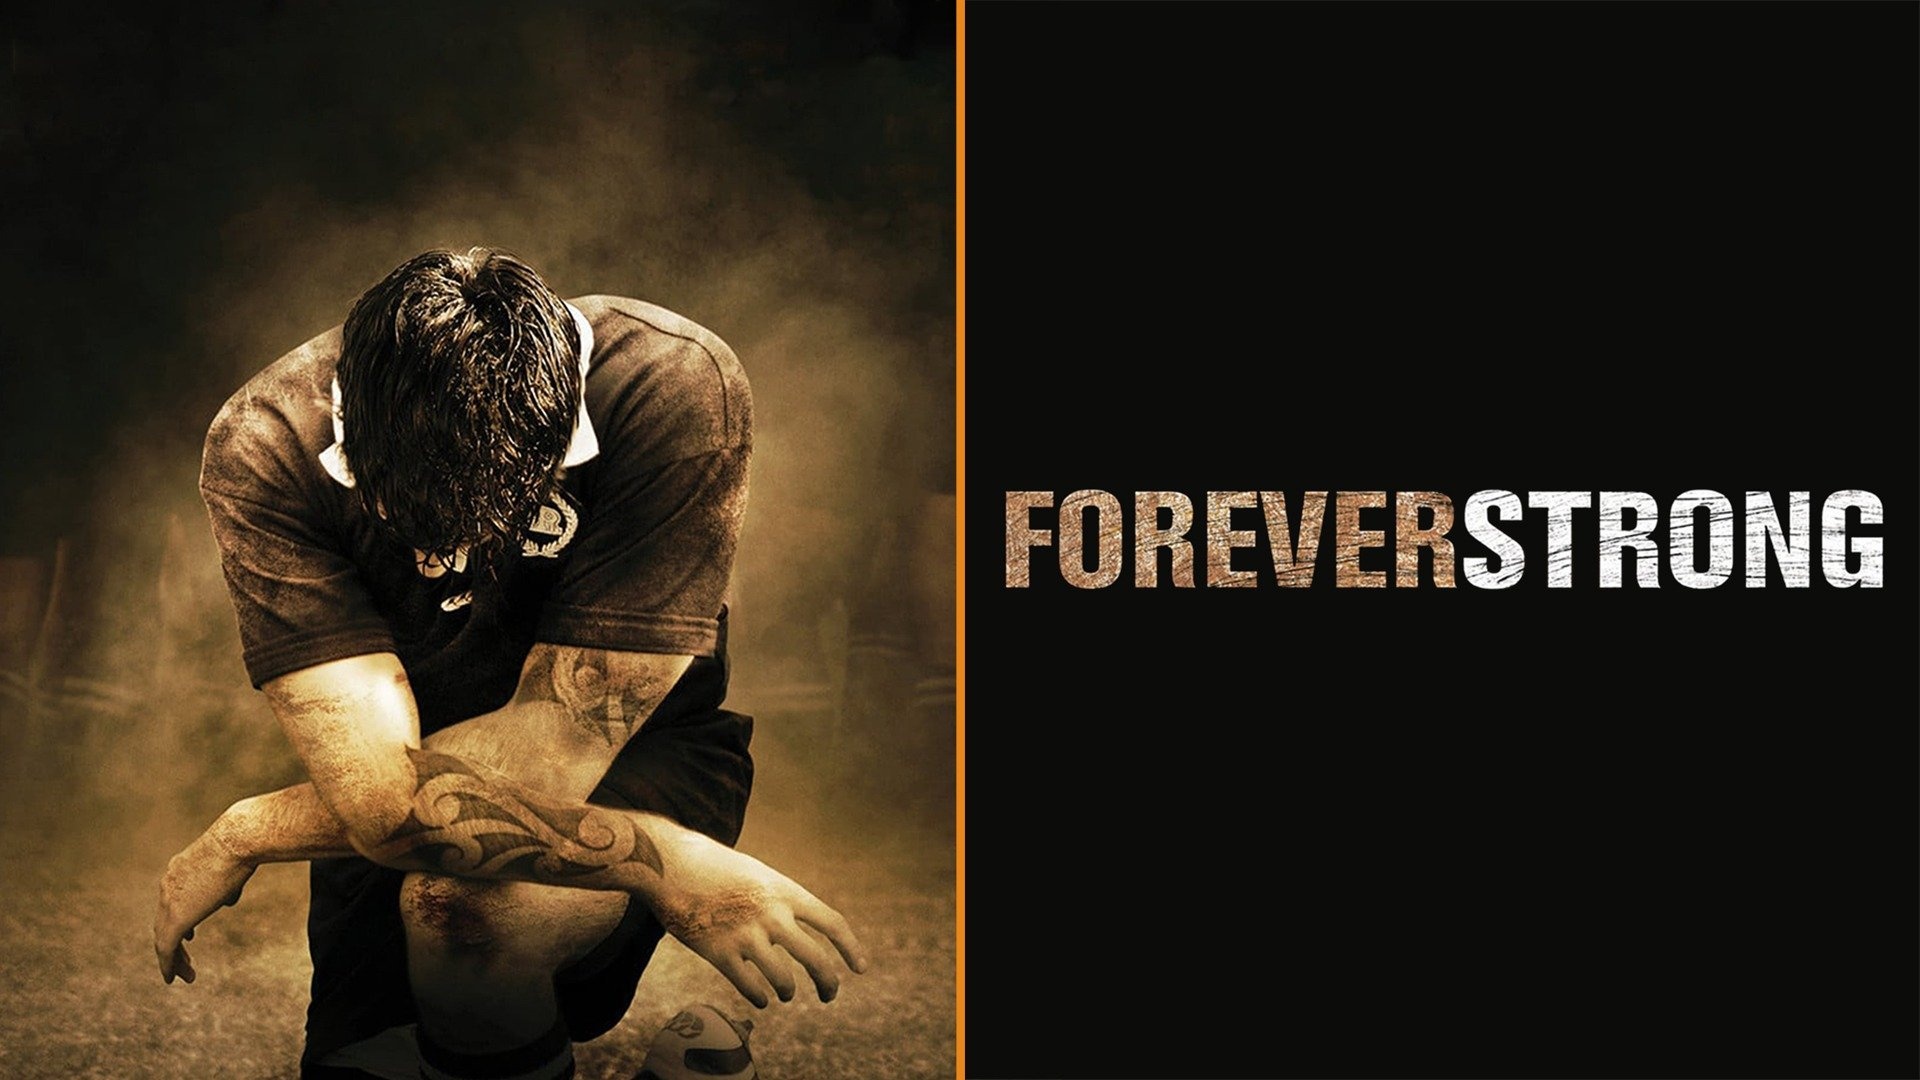 Forever Strong film, Sports redemption, Inspirational coach, Rugby team, 1920x1080 Full HD Desktop